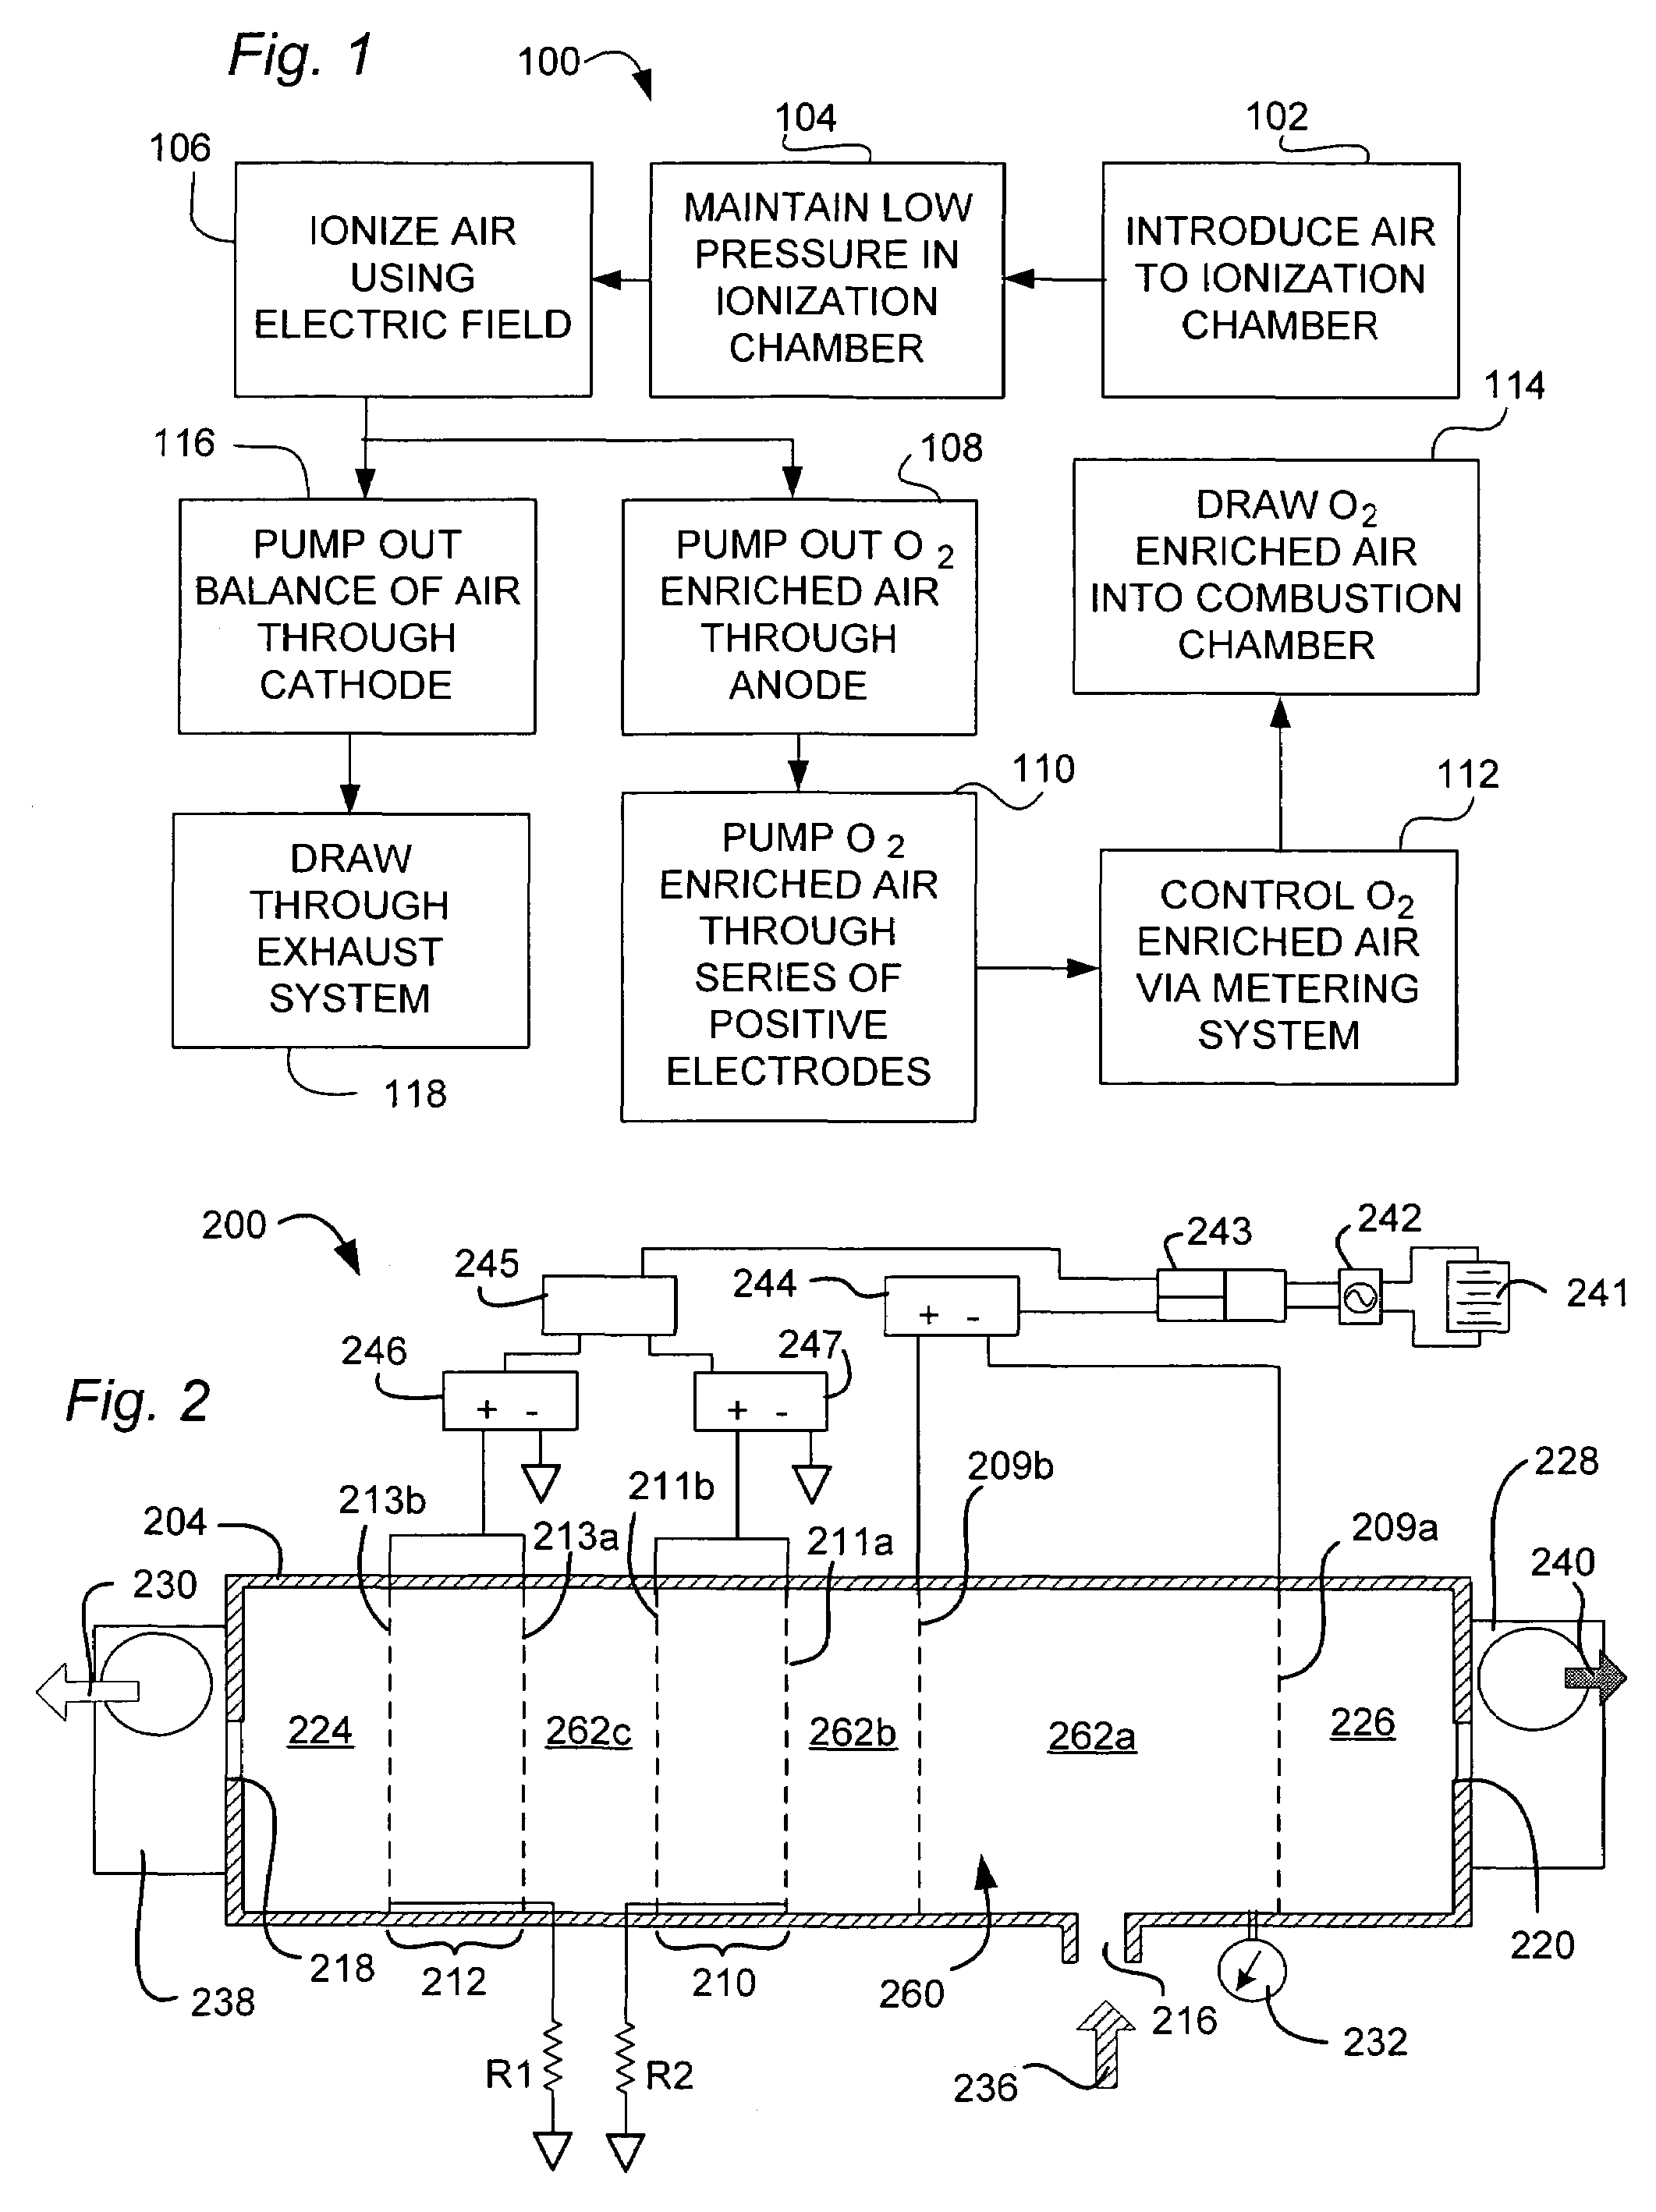 Gas separator for providing an oxygen-enriched stream